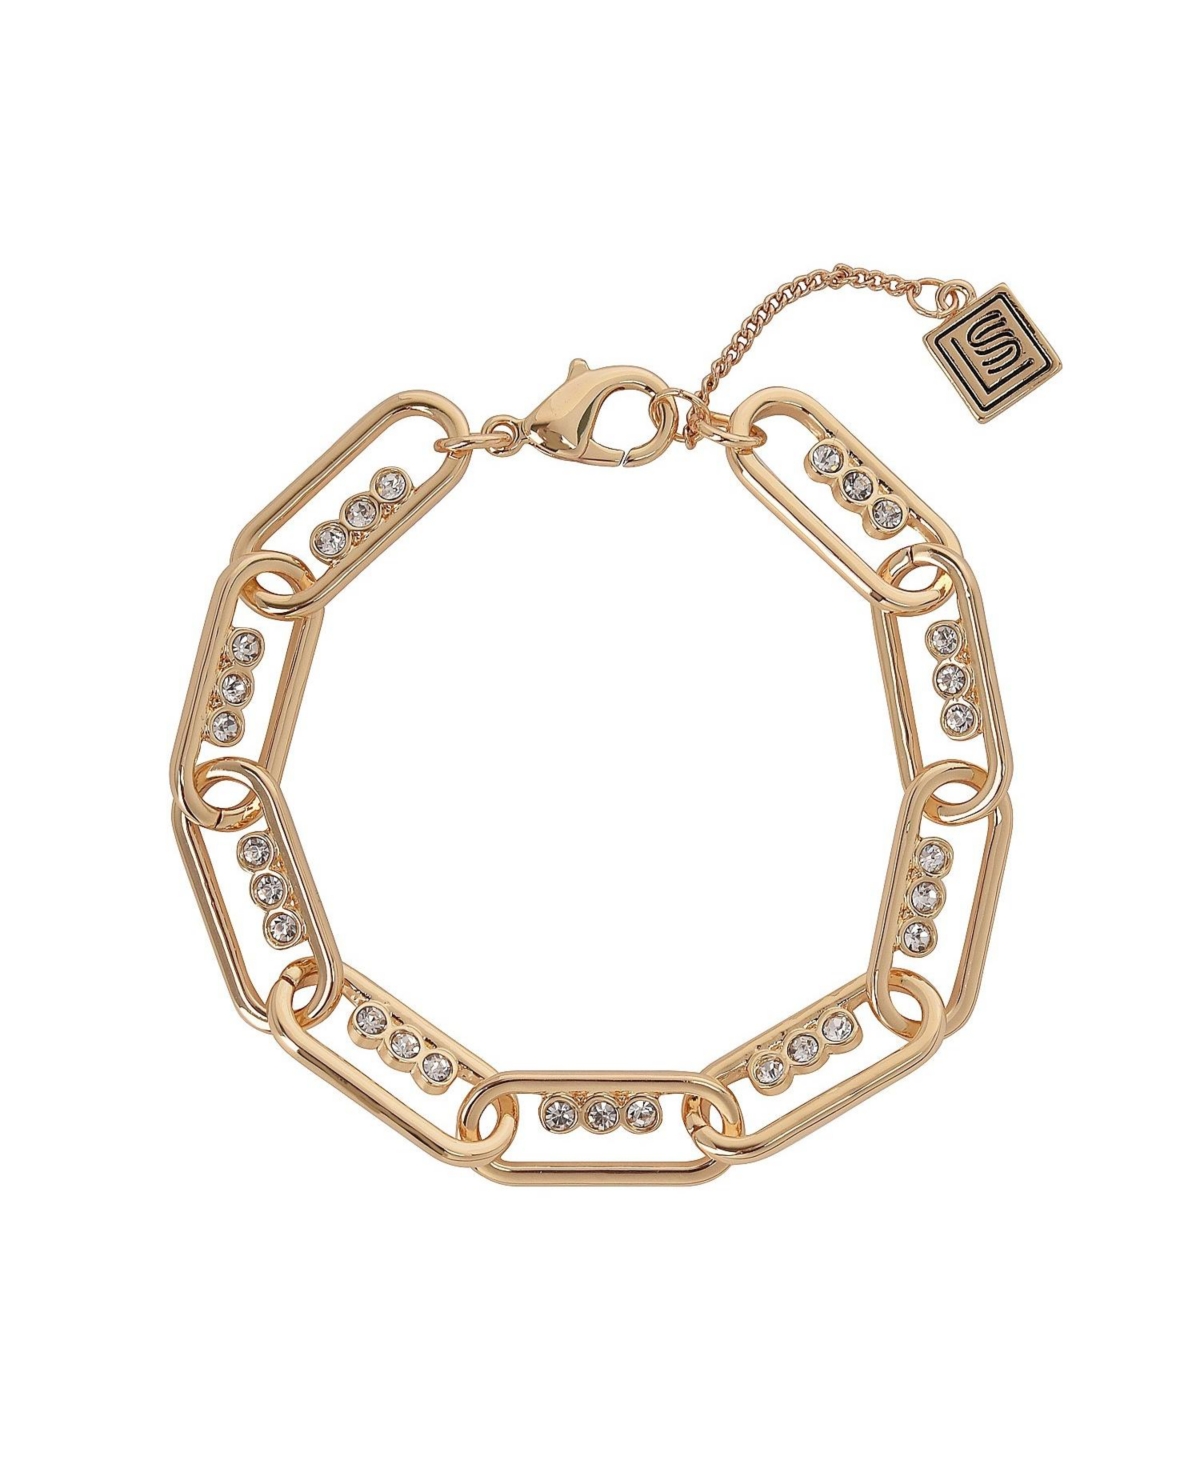 Gold Tone Chain Bracelet with Crystal Stone Accents - Gold